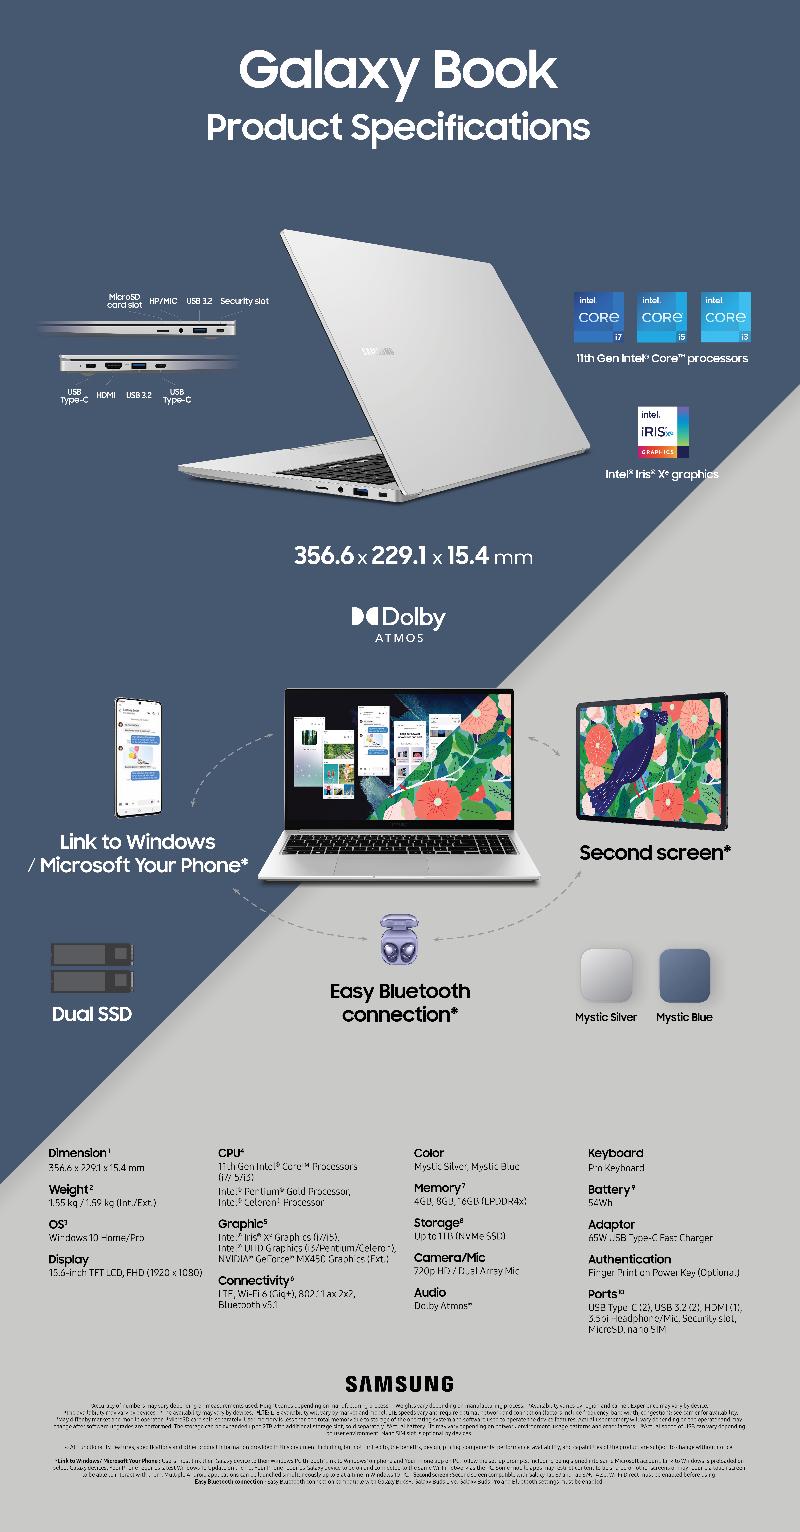 galaxy_book_product_specifications-3.jpg